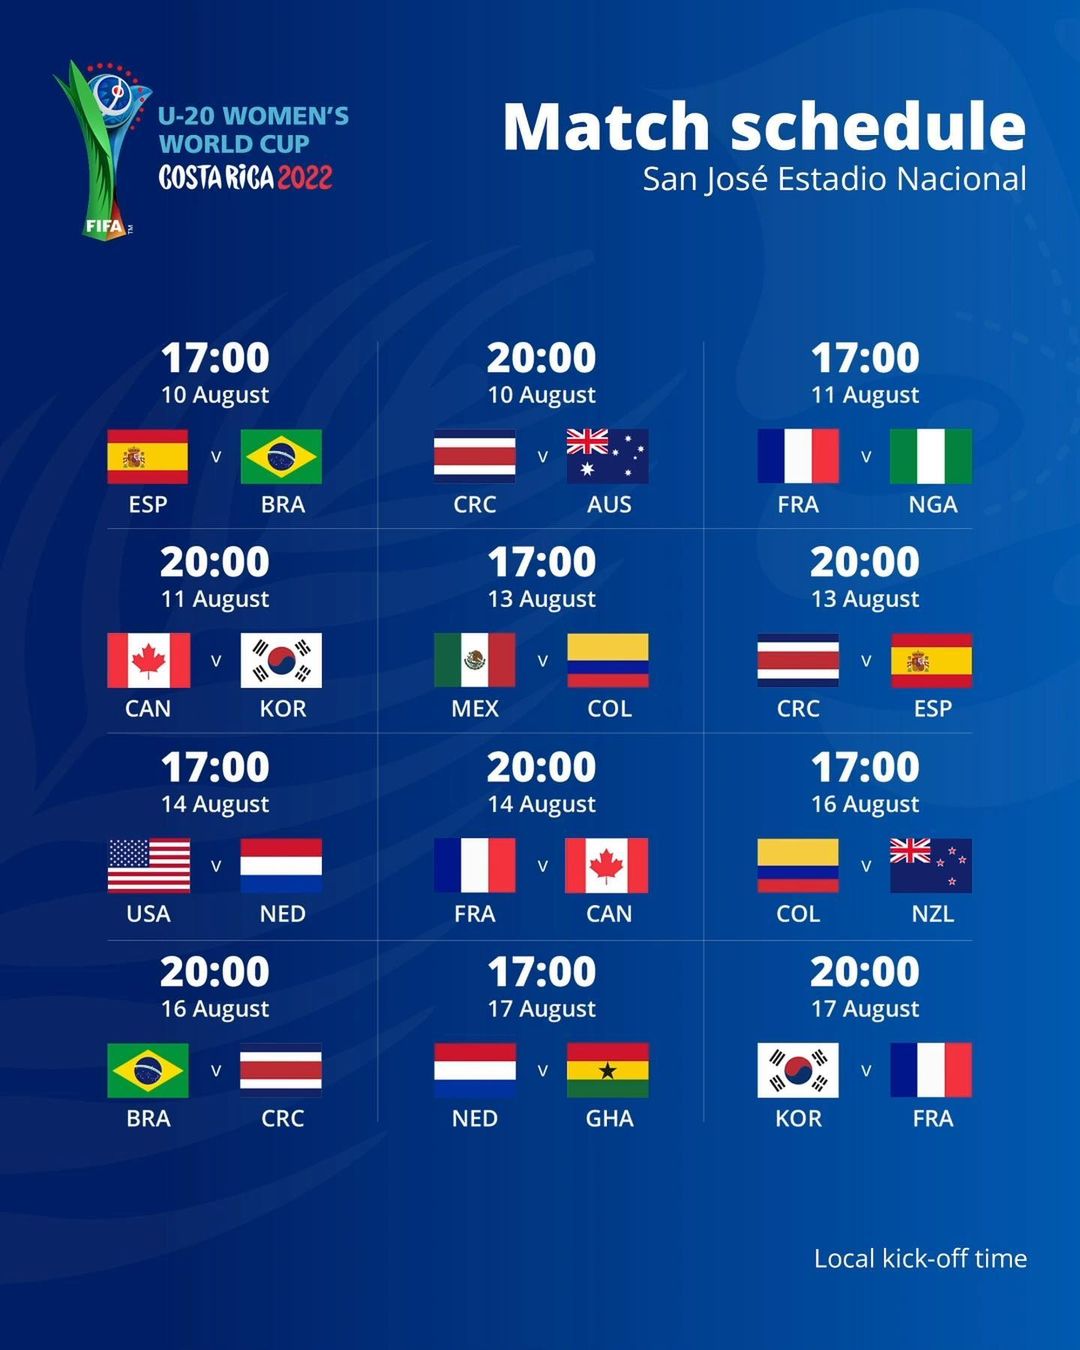  fifawomensworldcup